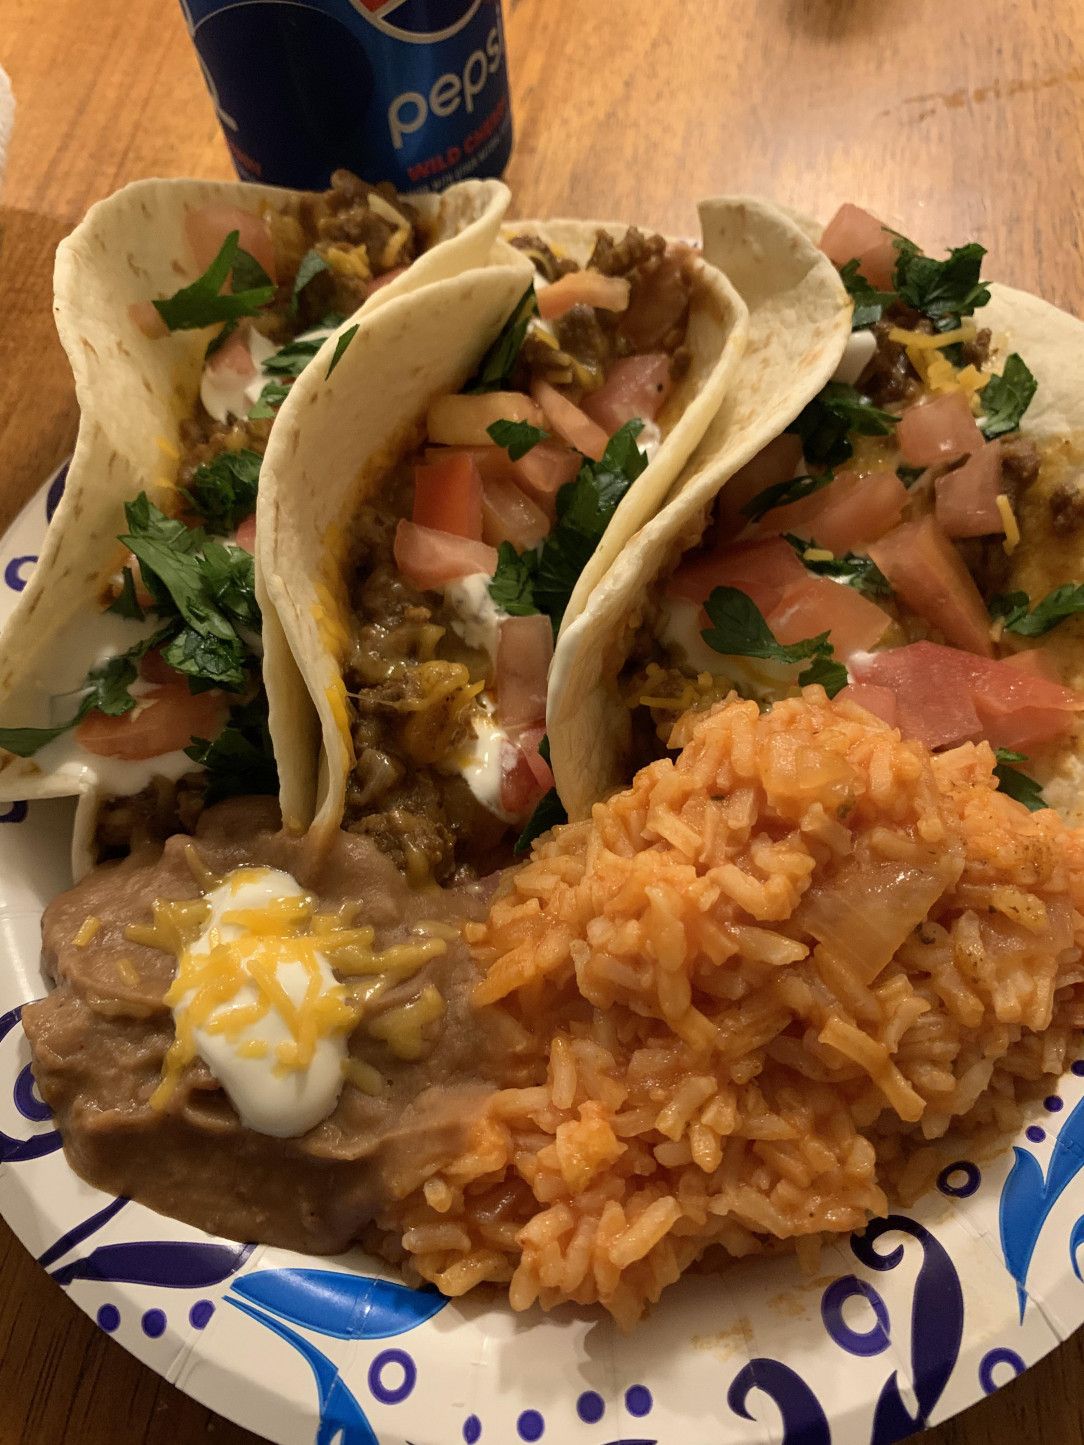 Tacos on paper plates still delicious